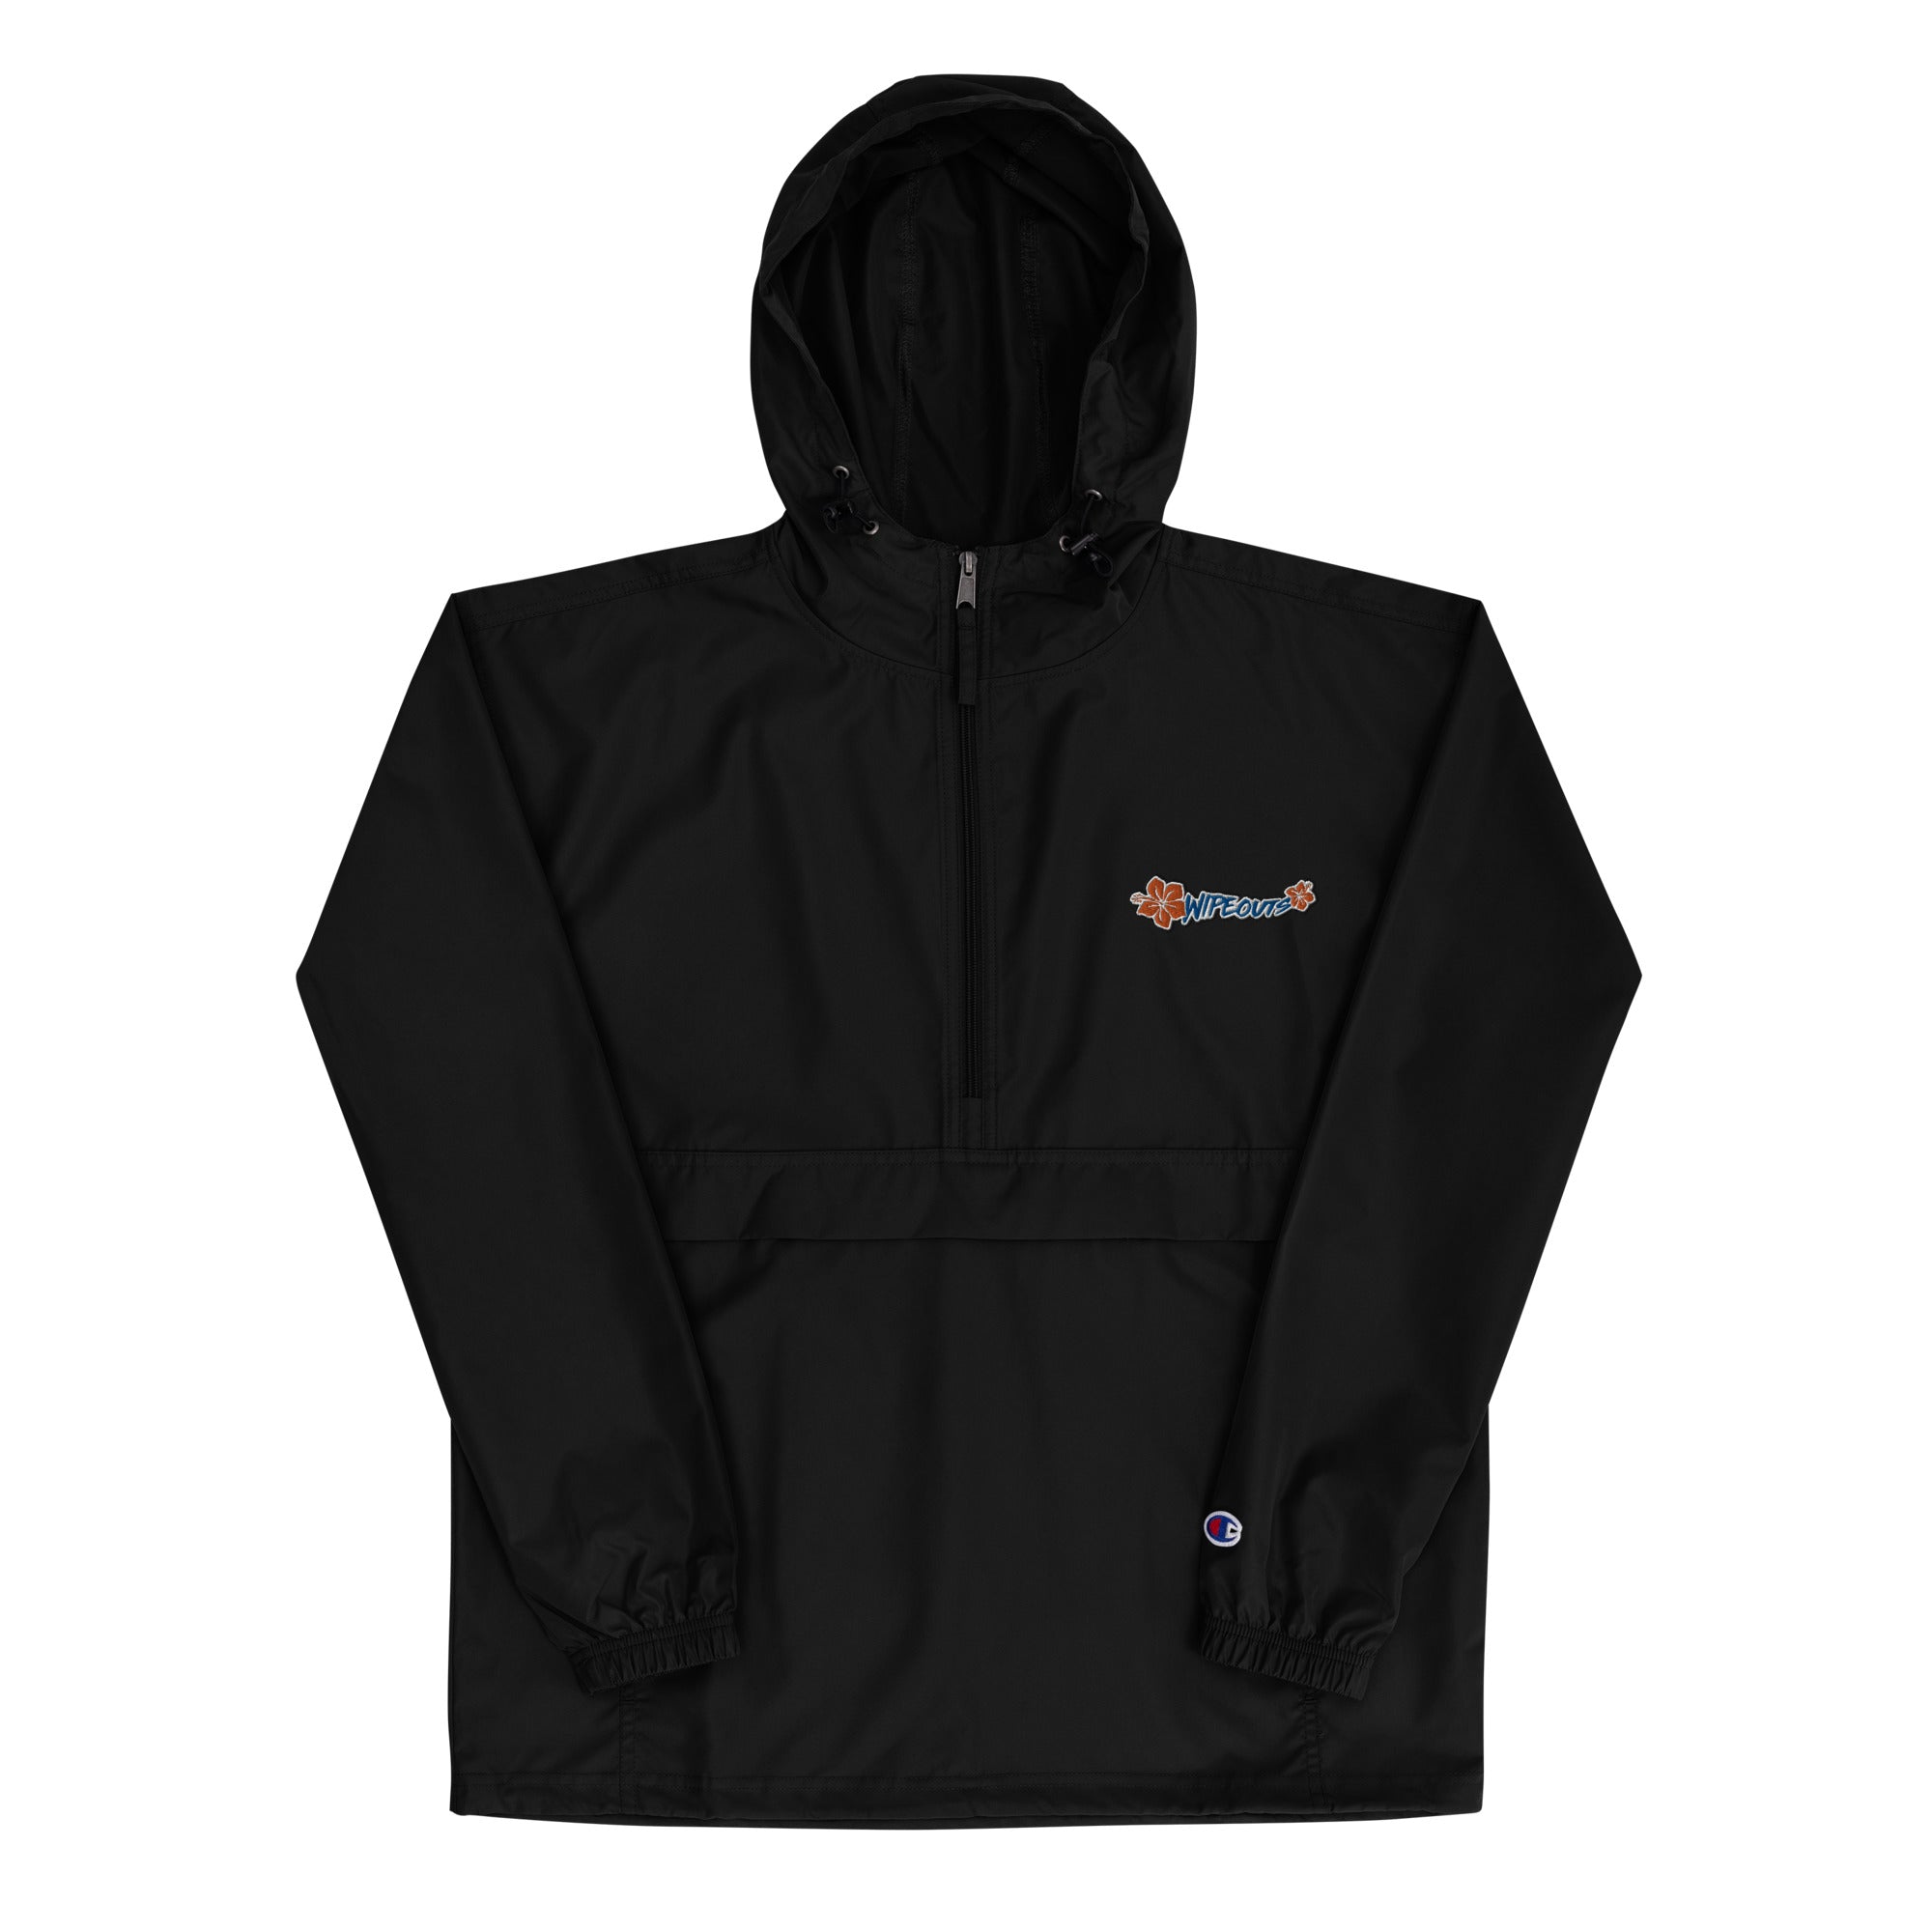 IEW Embroidered Champion Packable Jacket